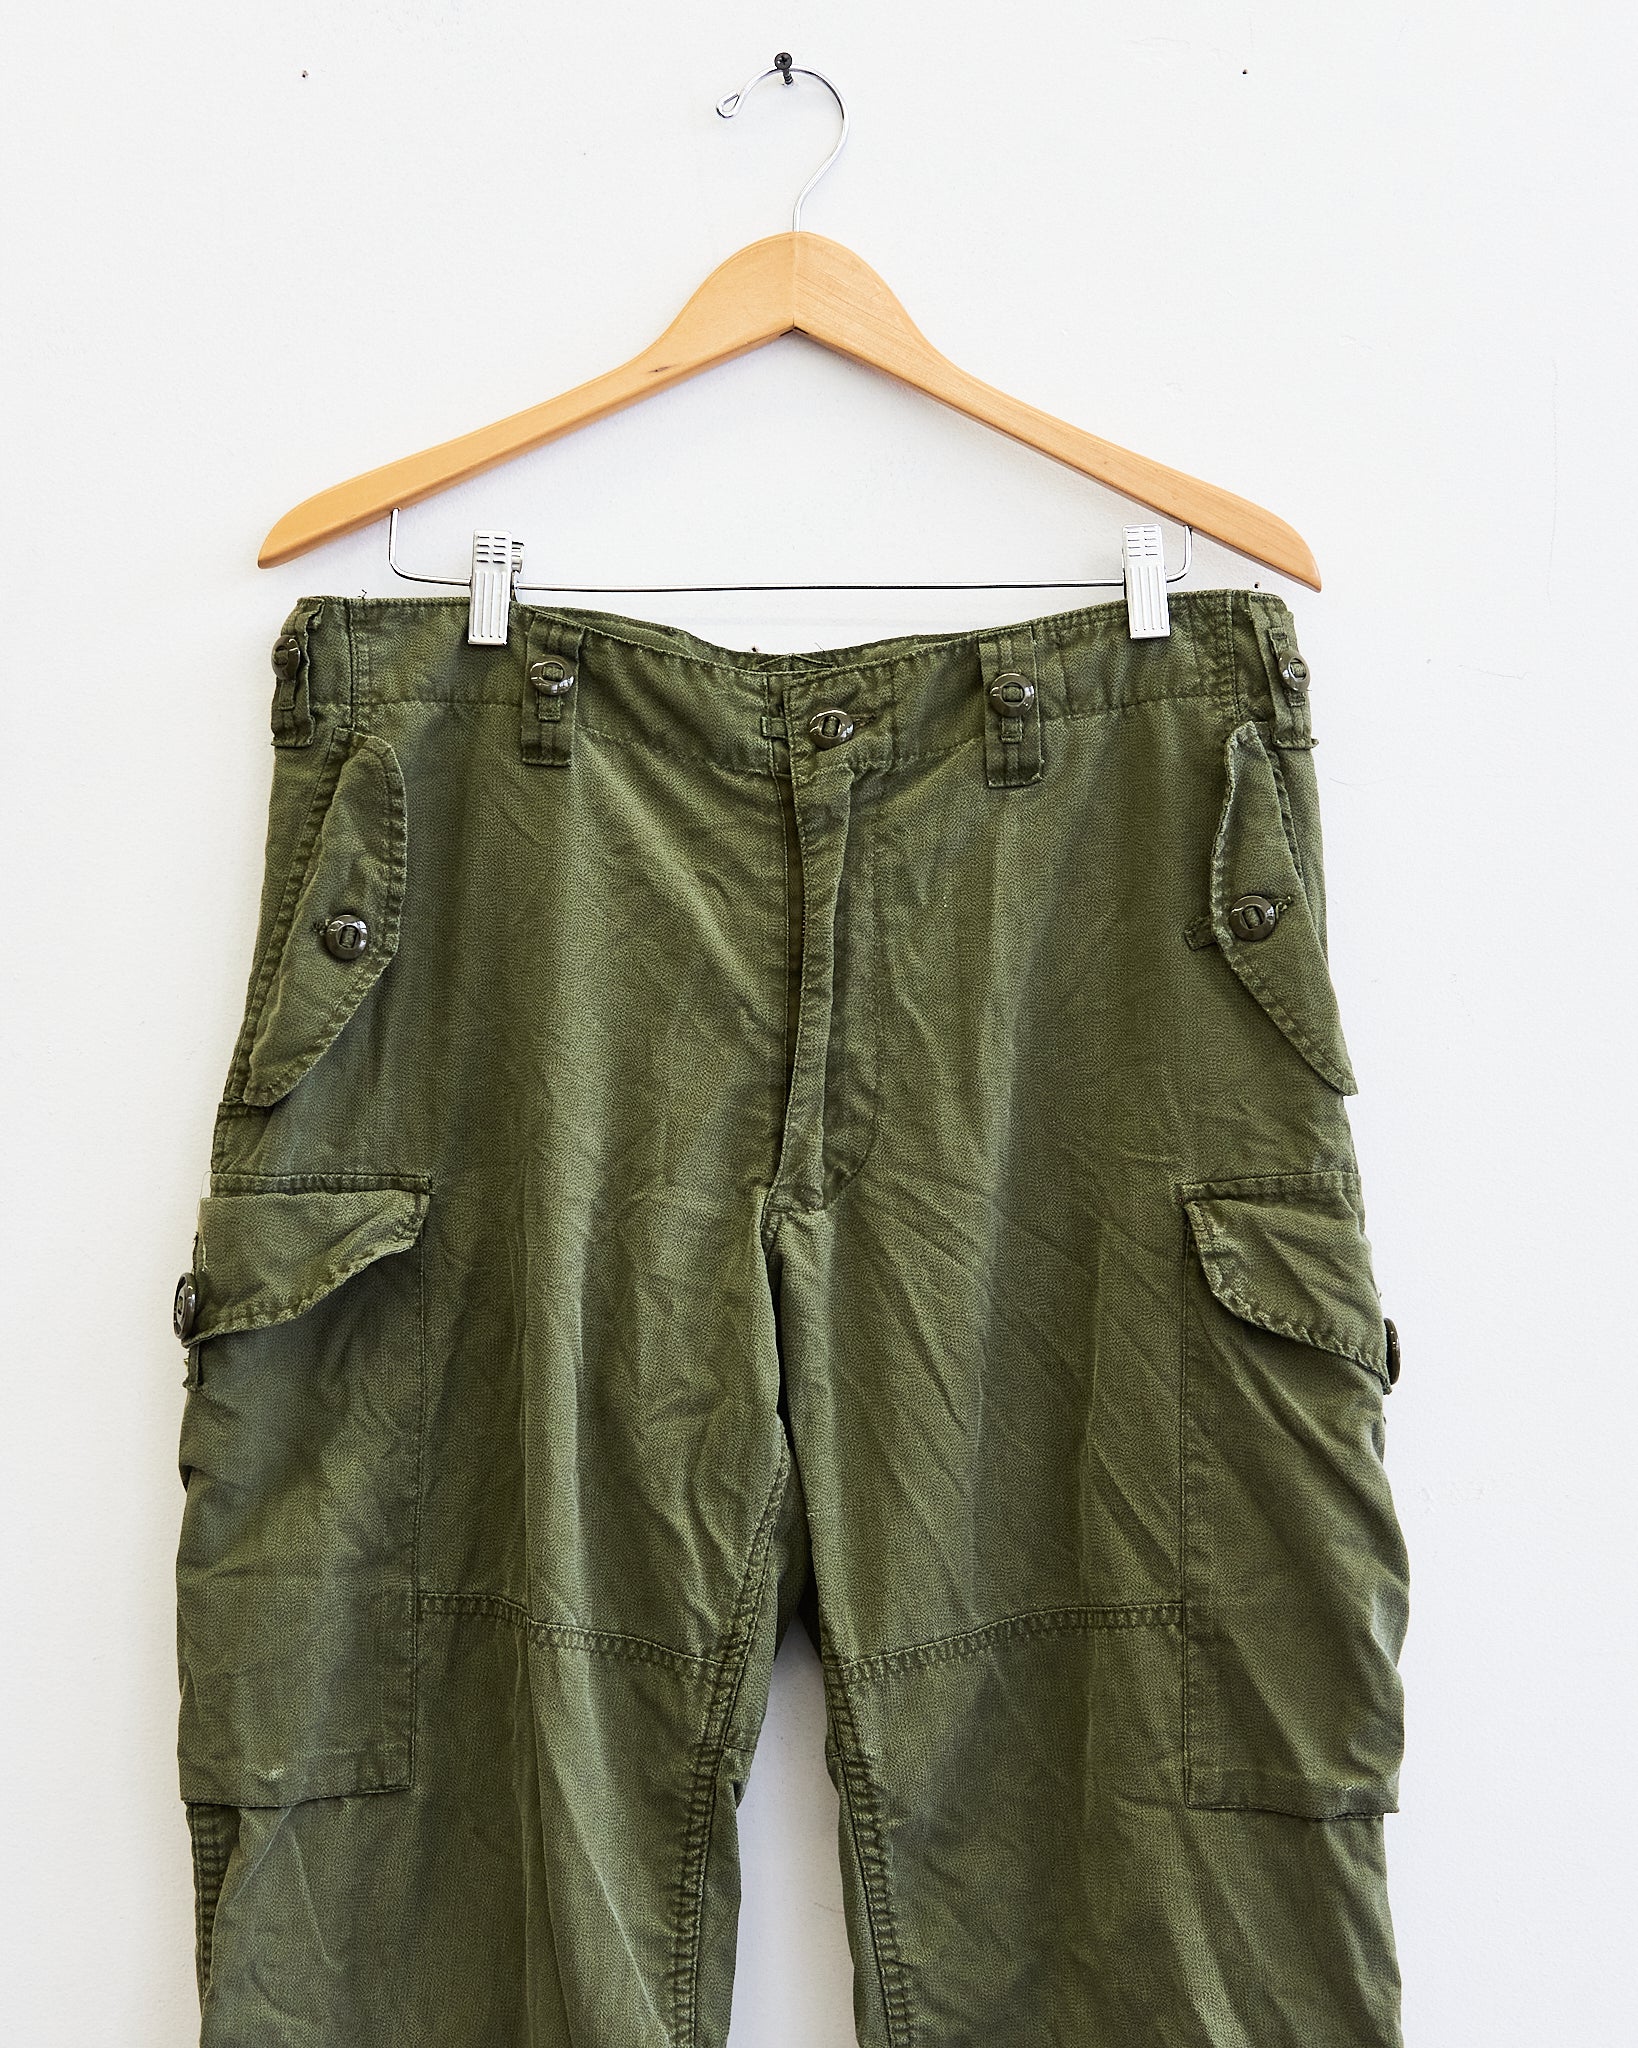 80s canadian army wind over pants